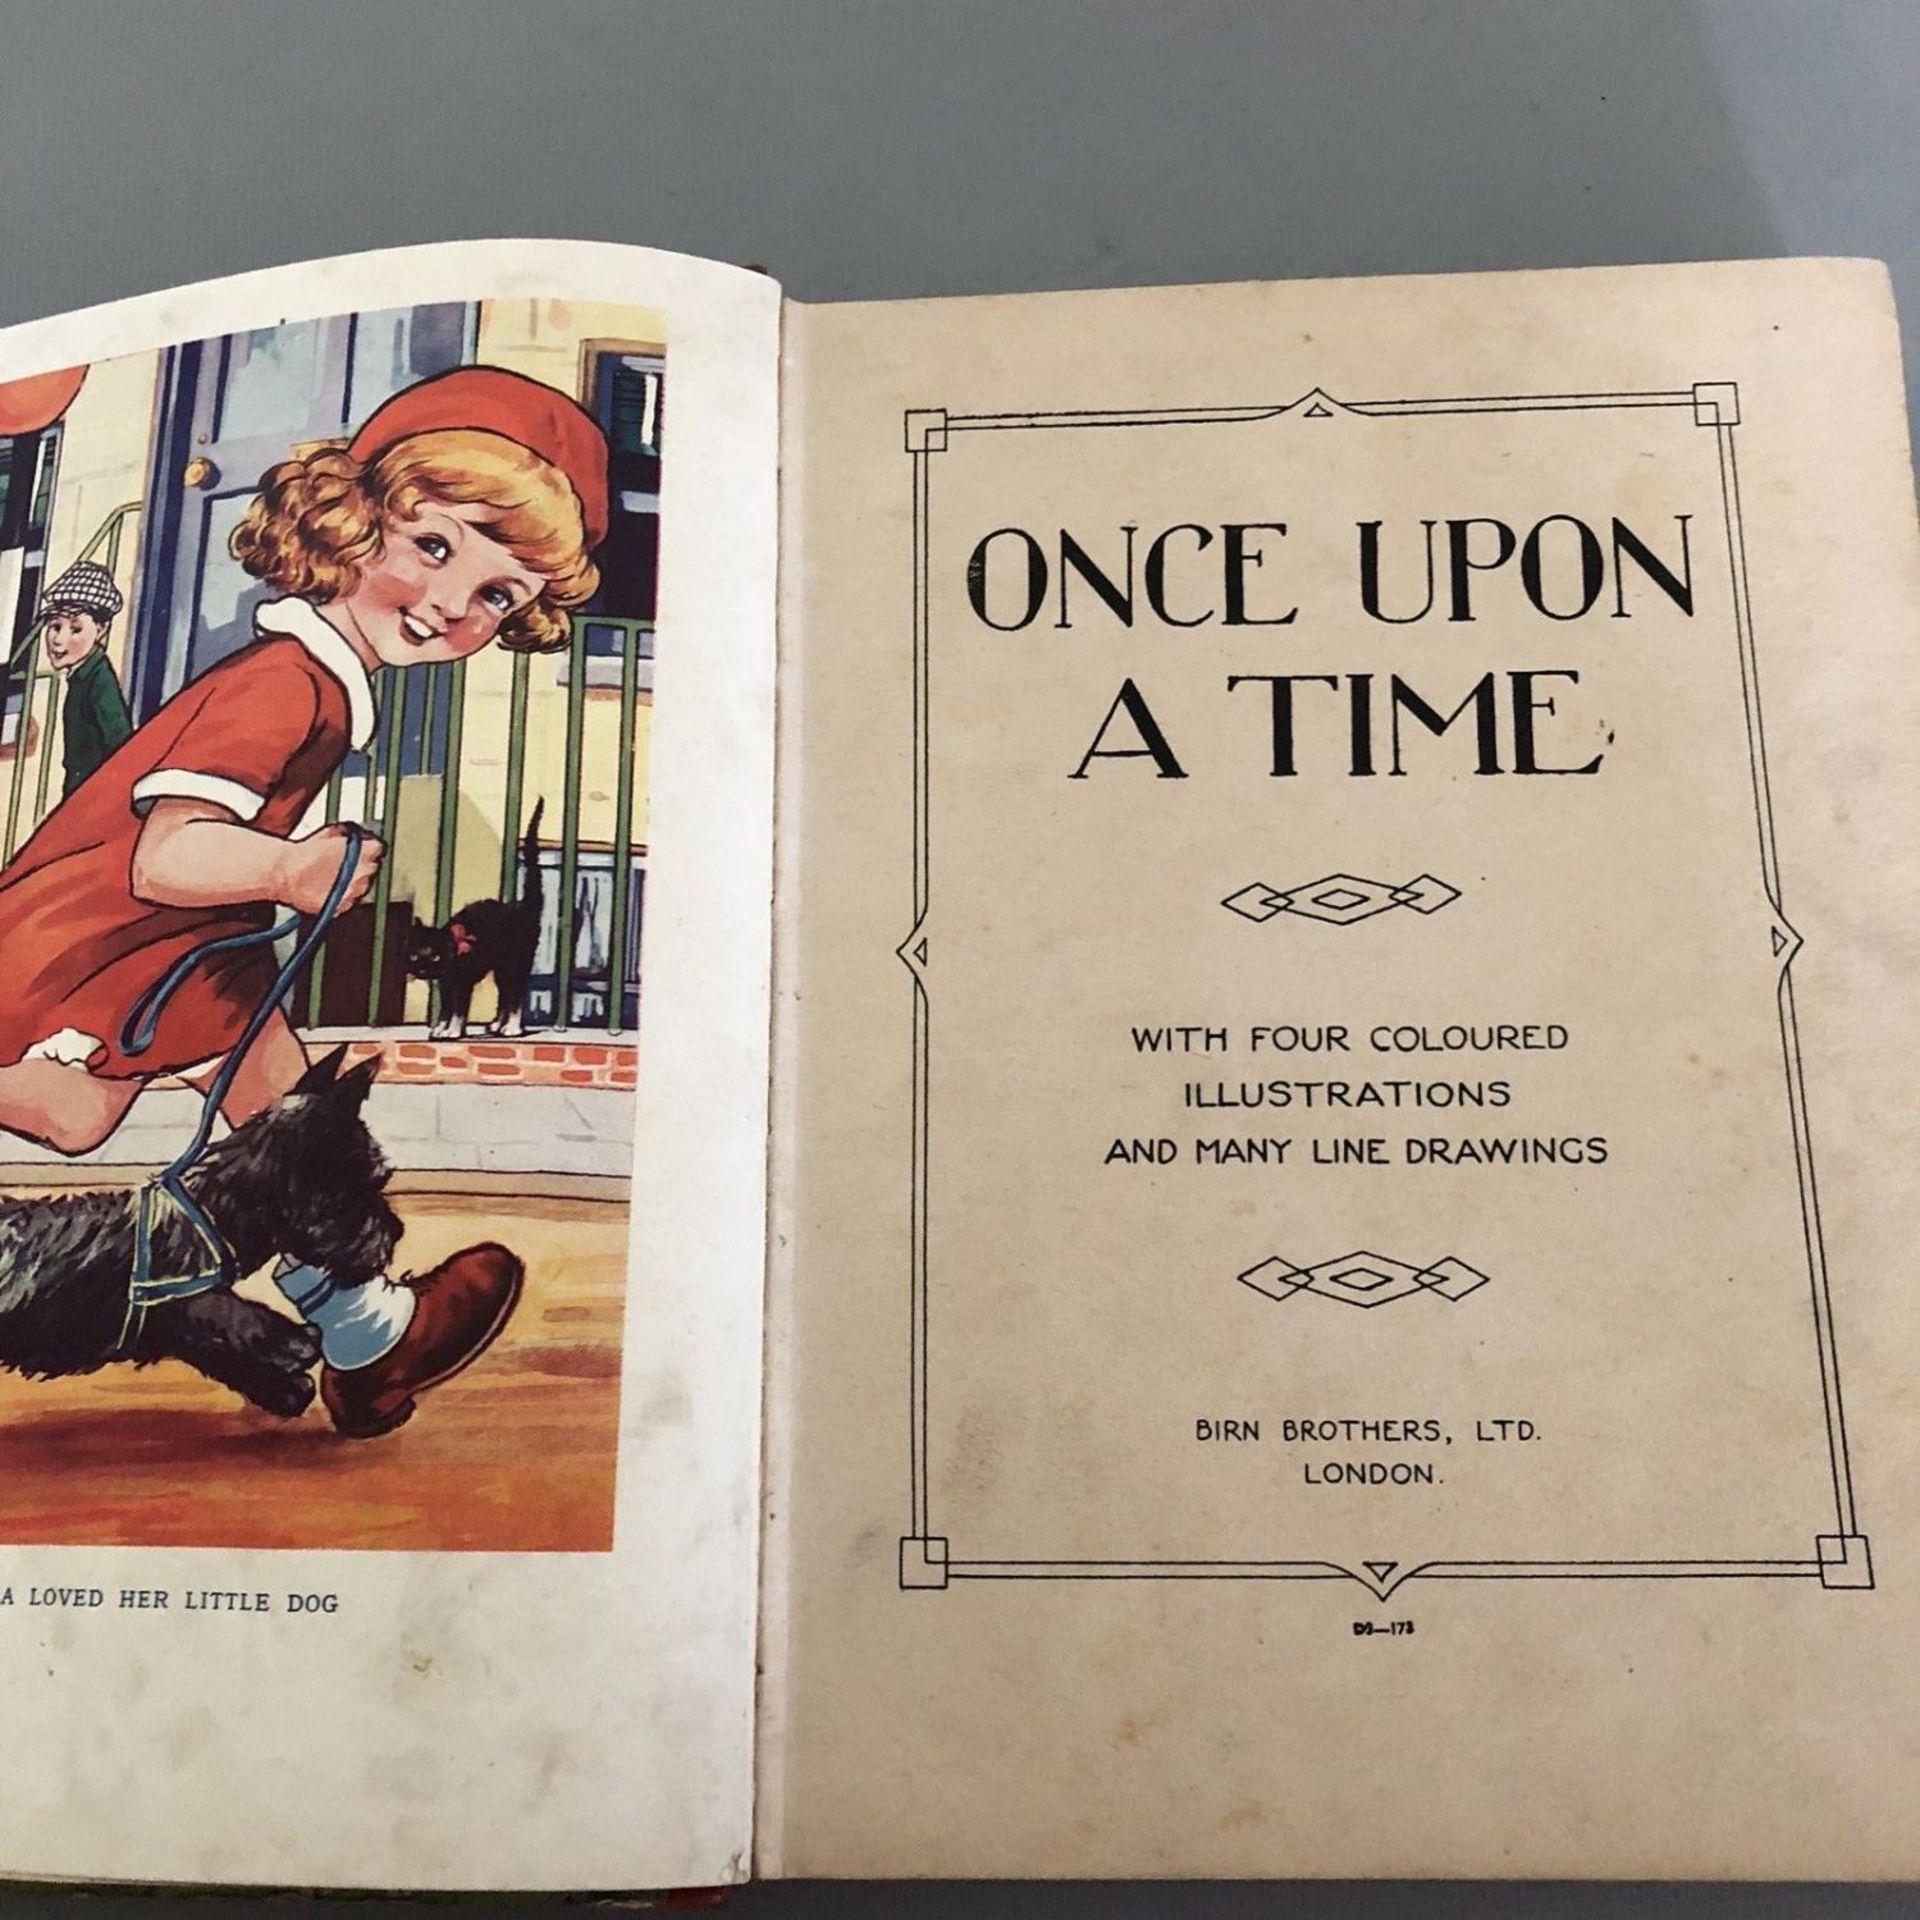 Vintage 1940s Children's Book "Once upon a Time" Stories Pictures Etc - Image 2 of 5